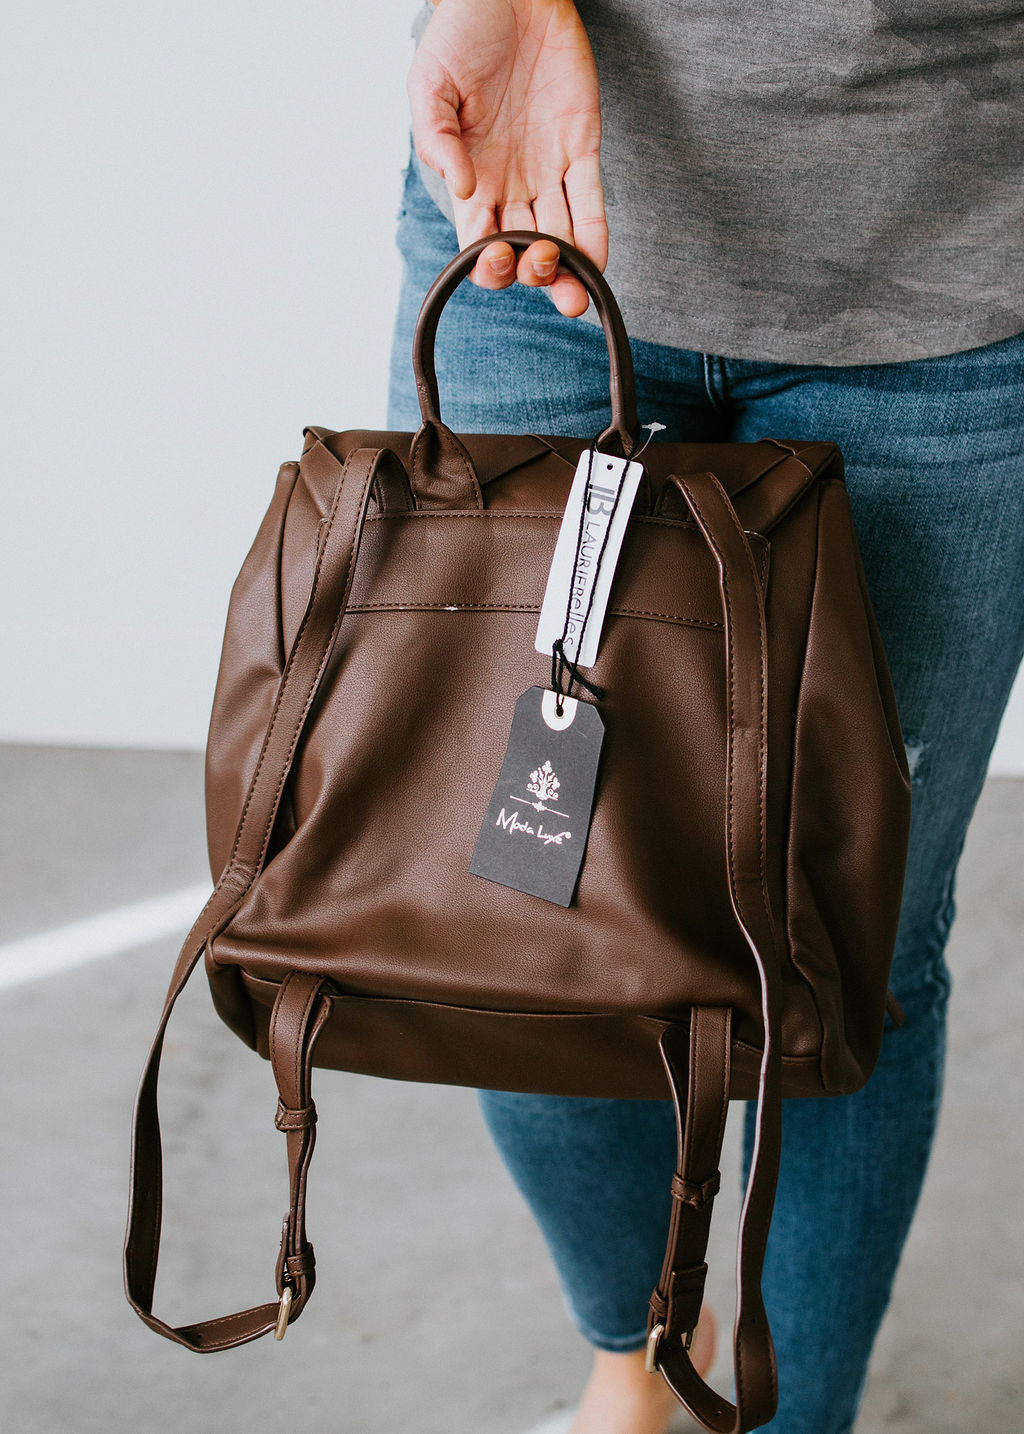 Moda Luxe Ryan Backpack - ONLINE ONLY